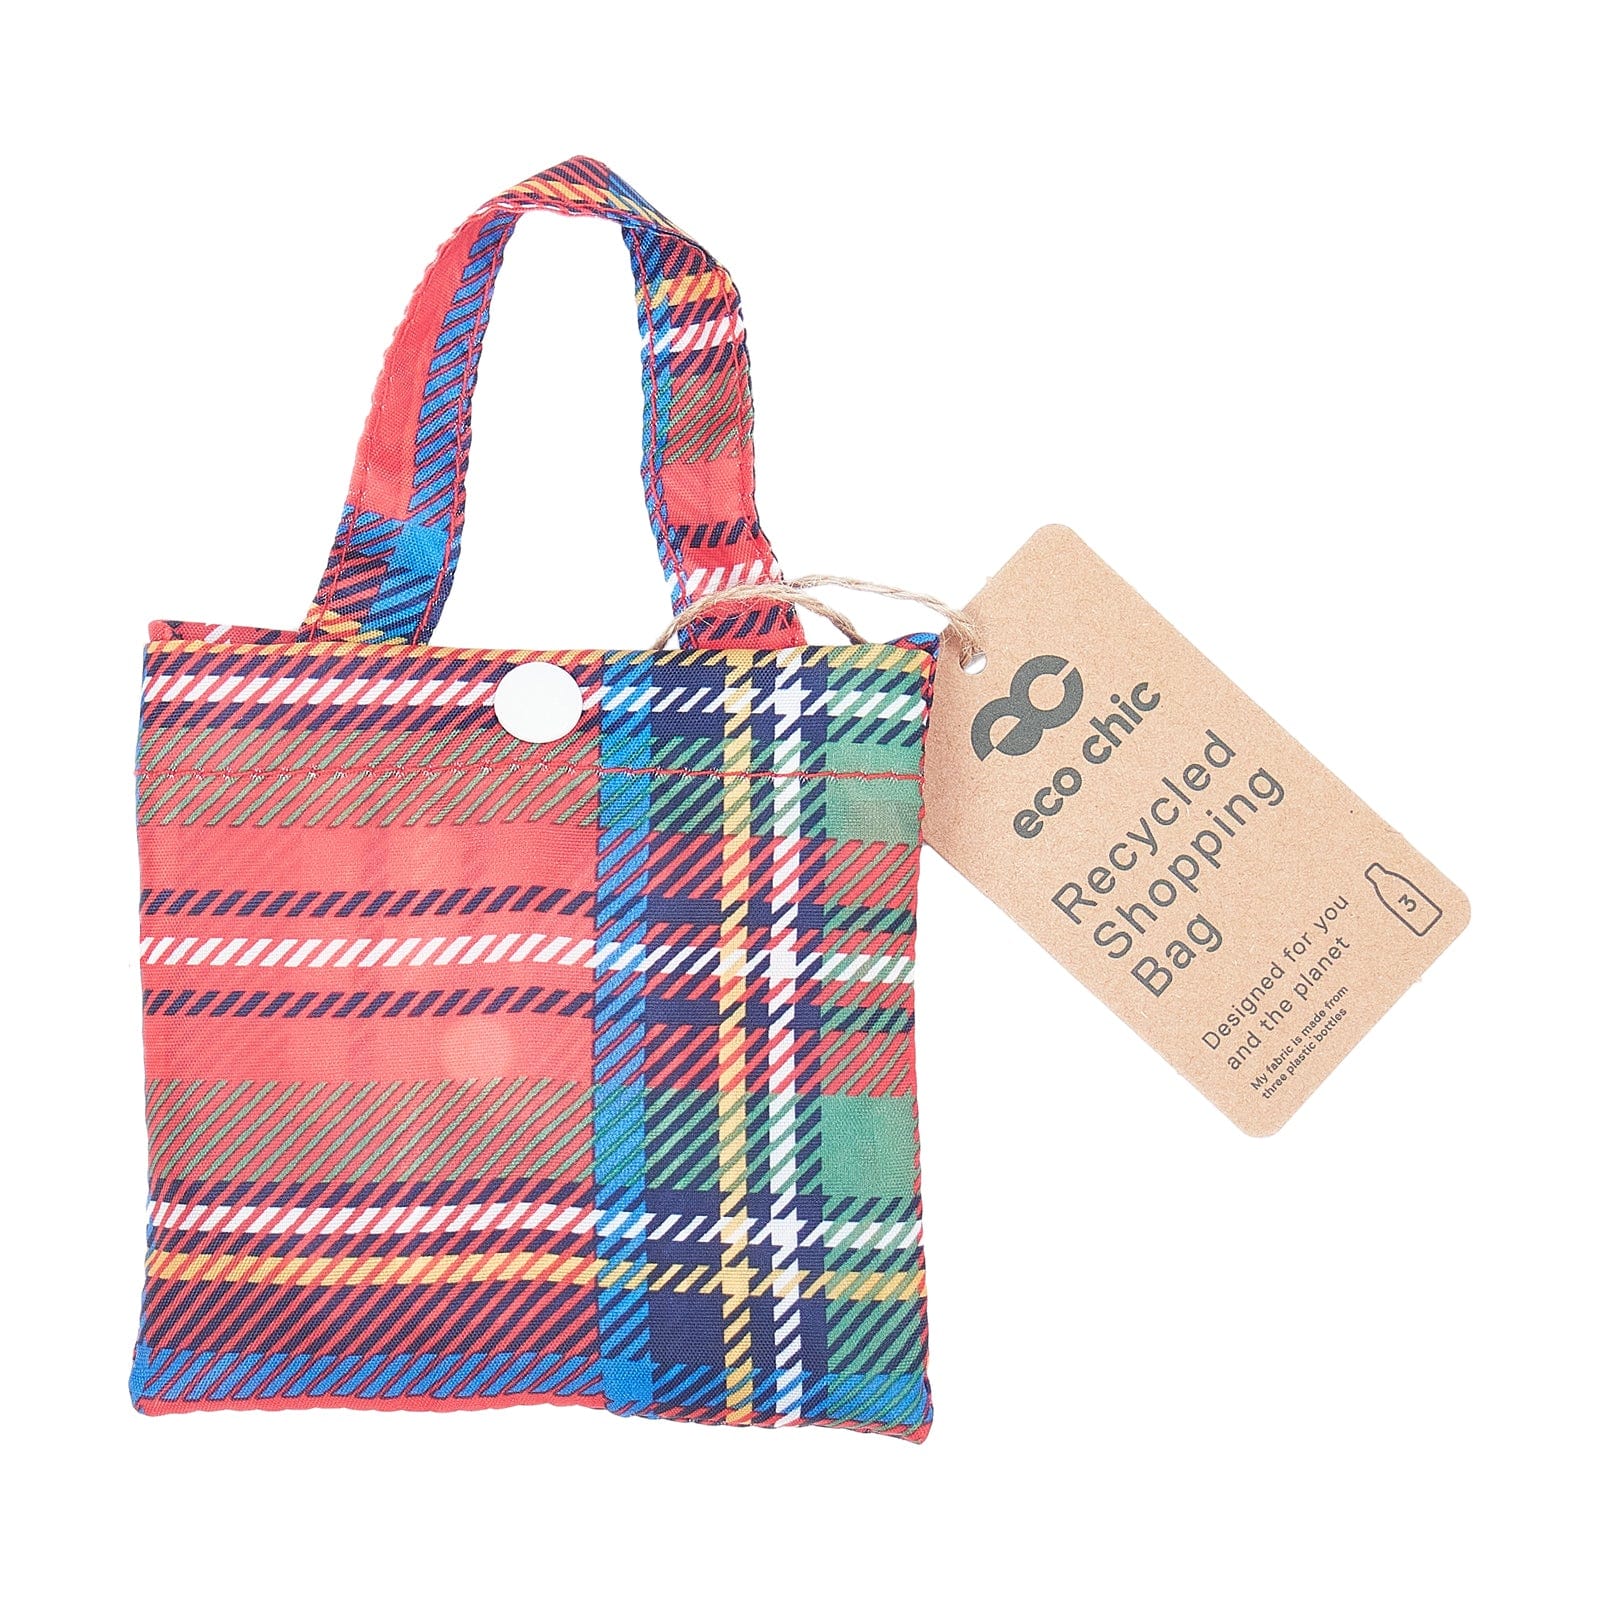 Eco Chic Red Eco Chic Lightweight Foldable Reusable Shopping Bag Tartan